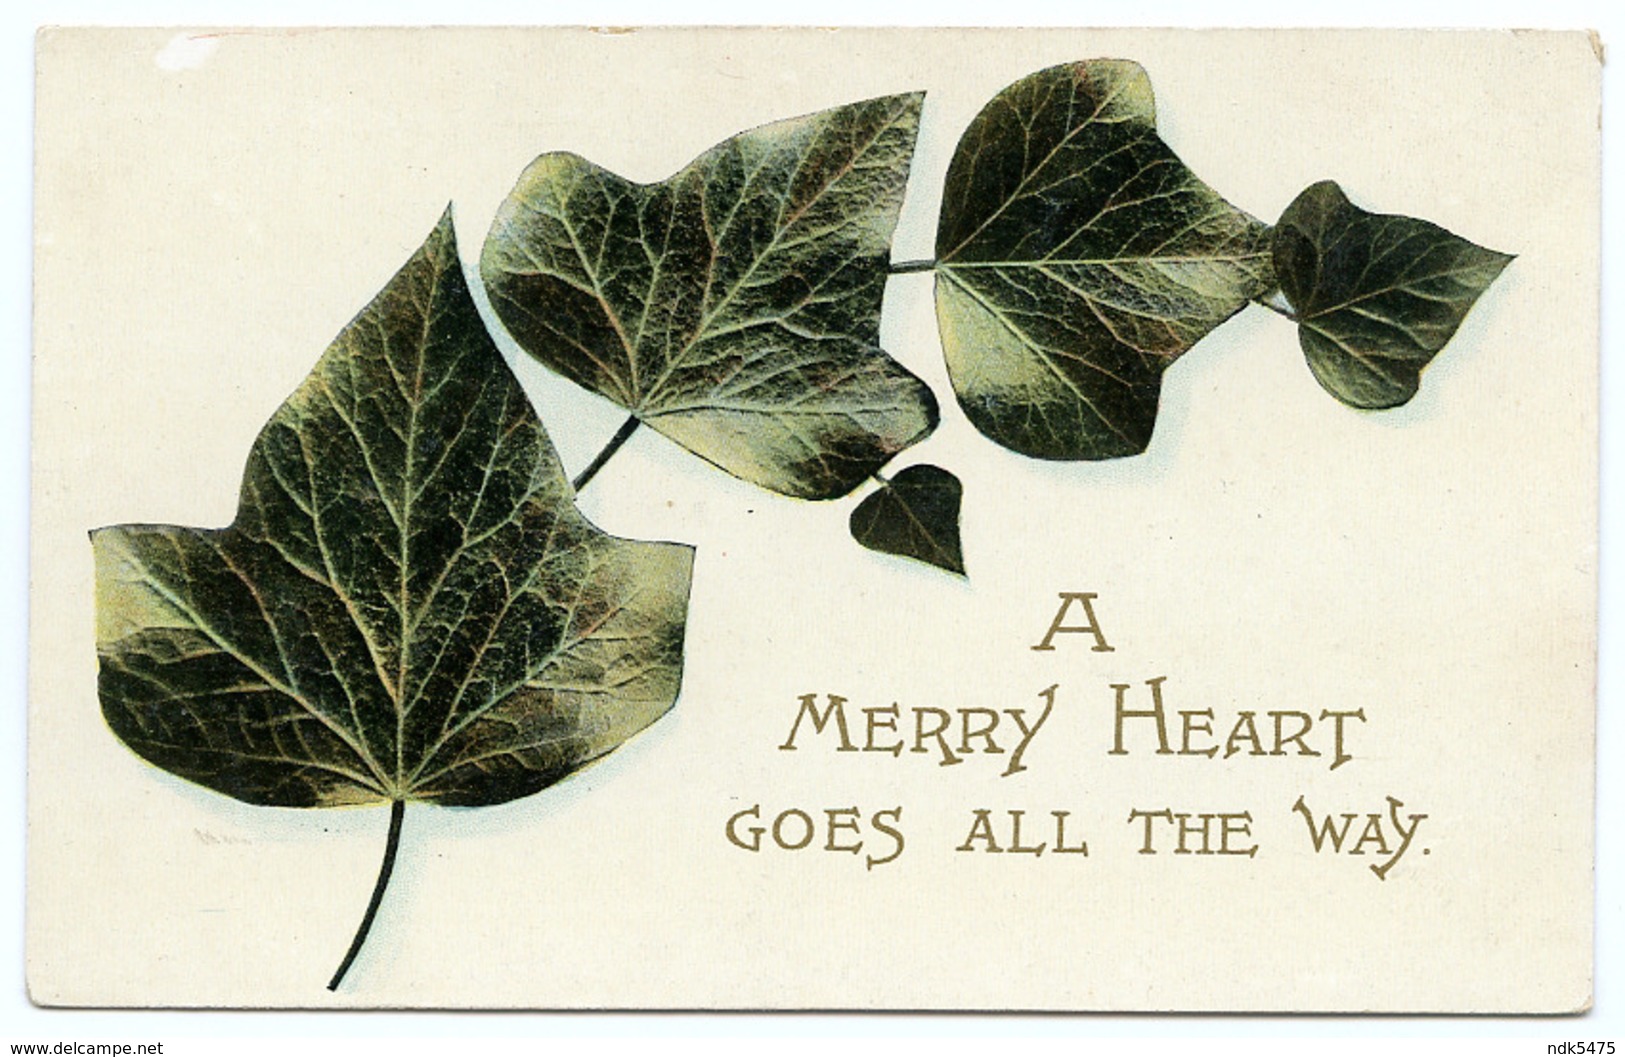 A MERRY HEART GOES ALL THE WAY : IVY - Compleanni